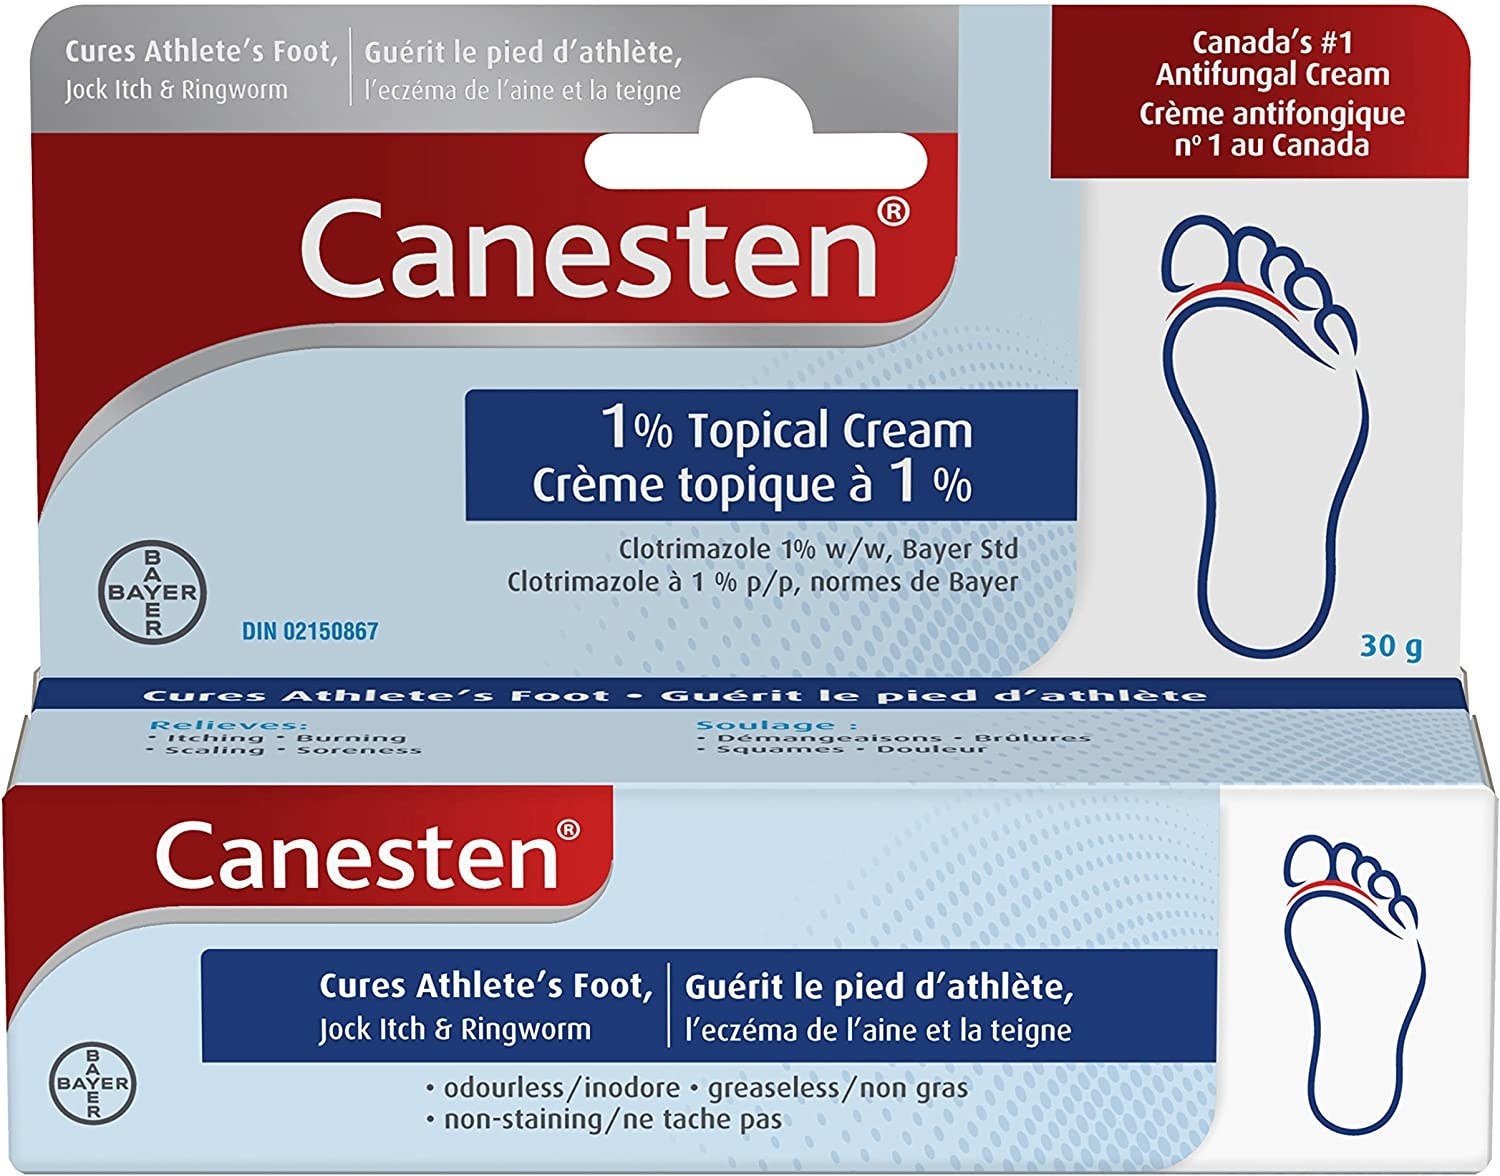 a package of canesten anti-fungal cream